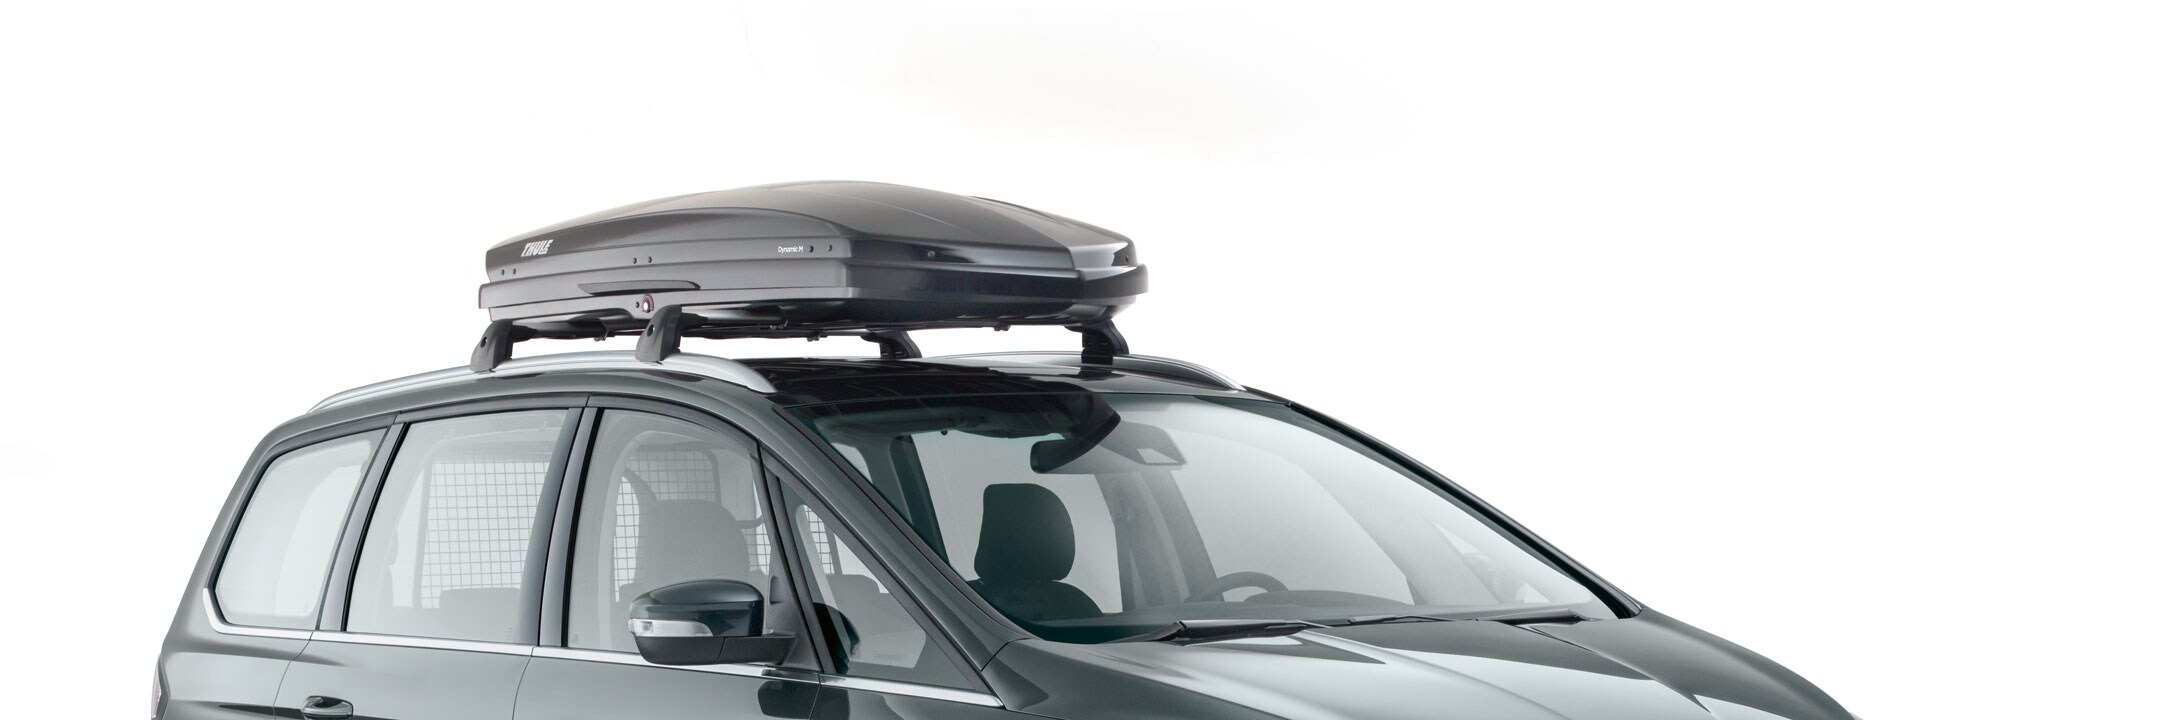 Thule® Roof Transportation Accessories